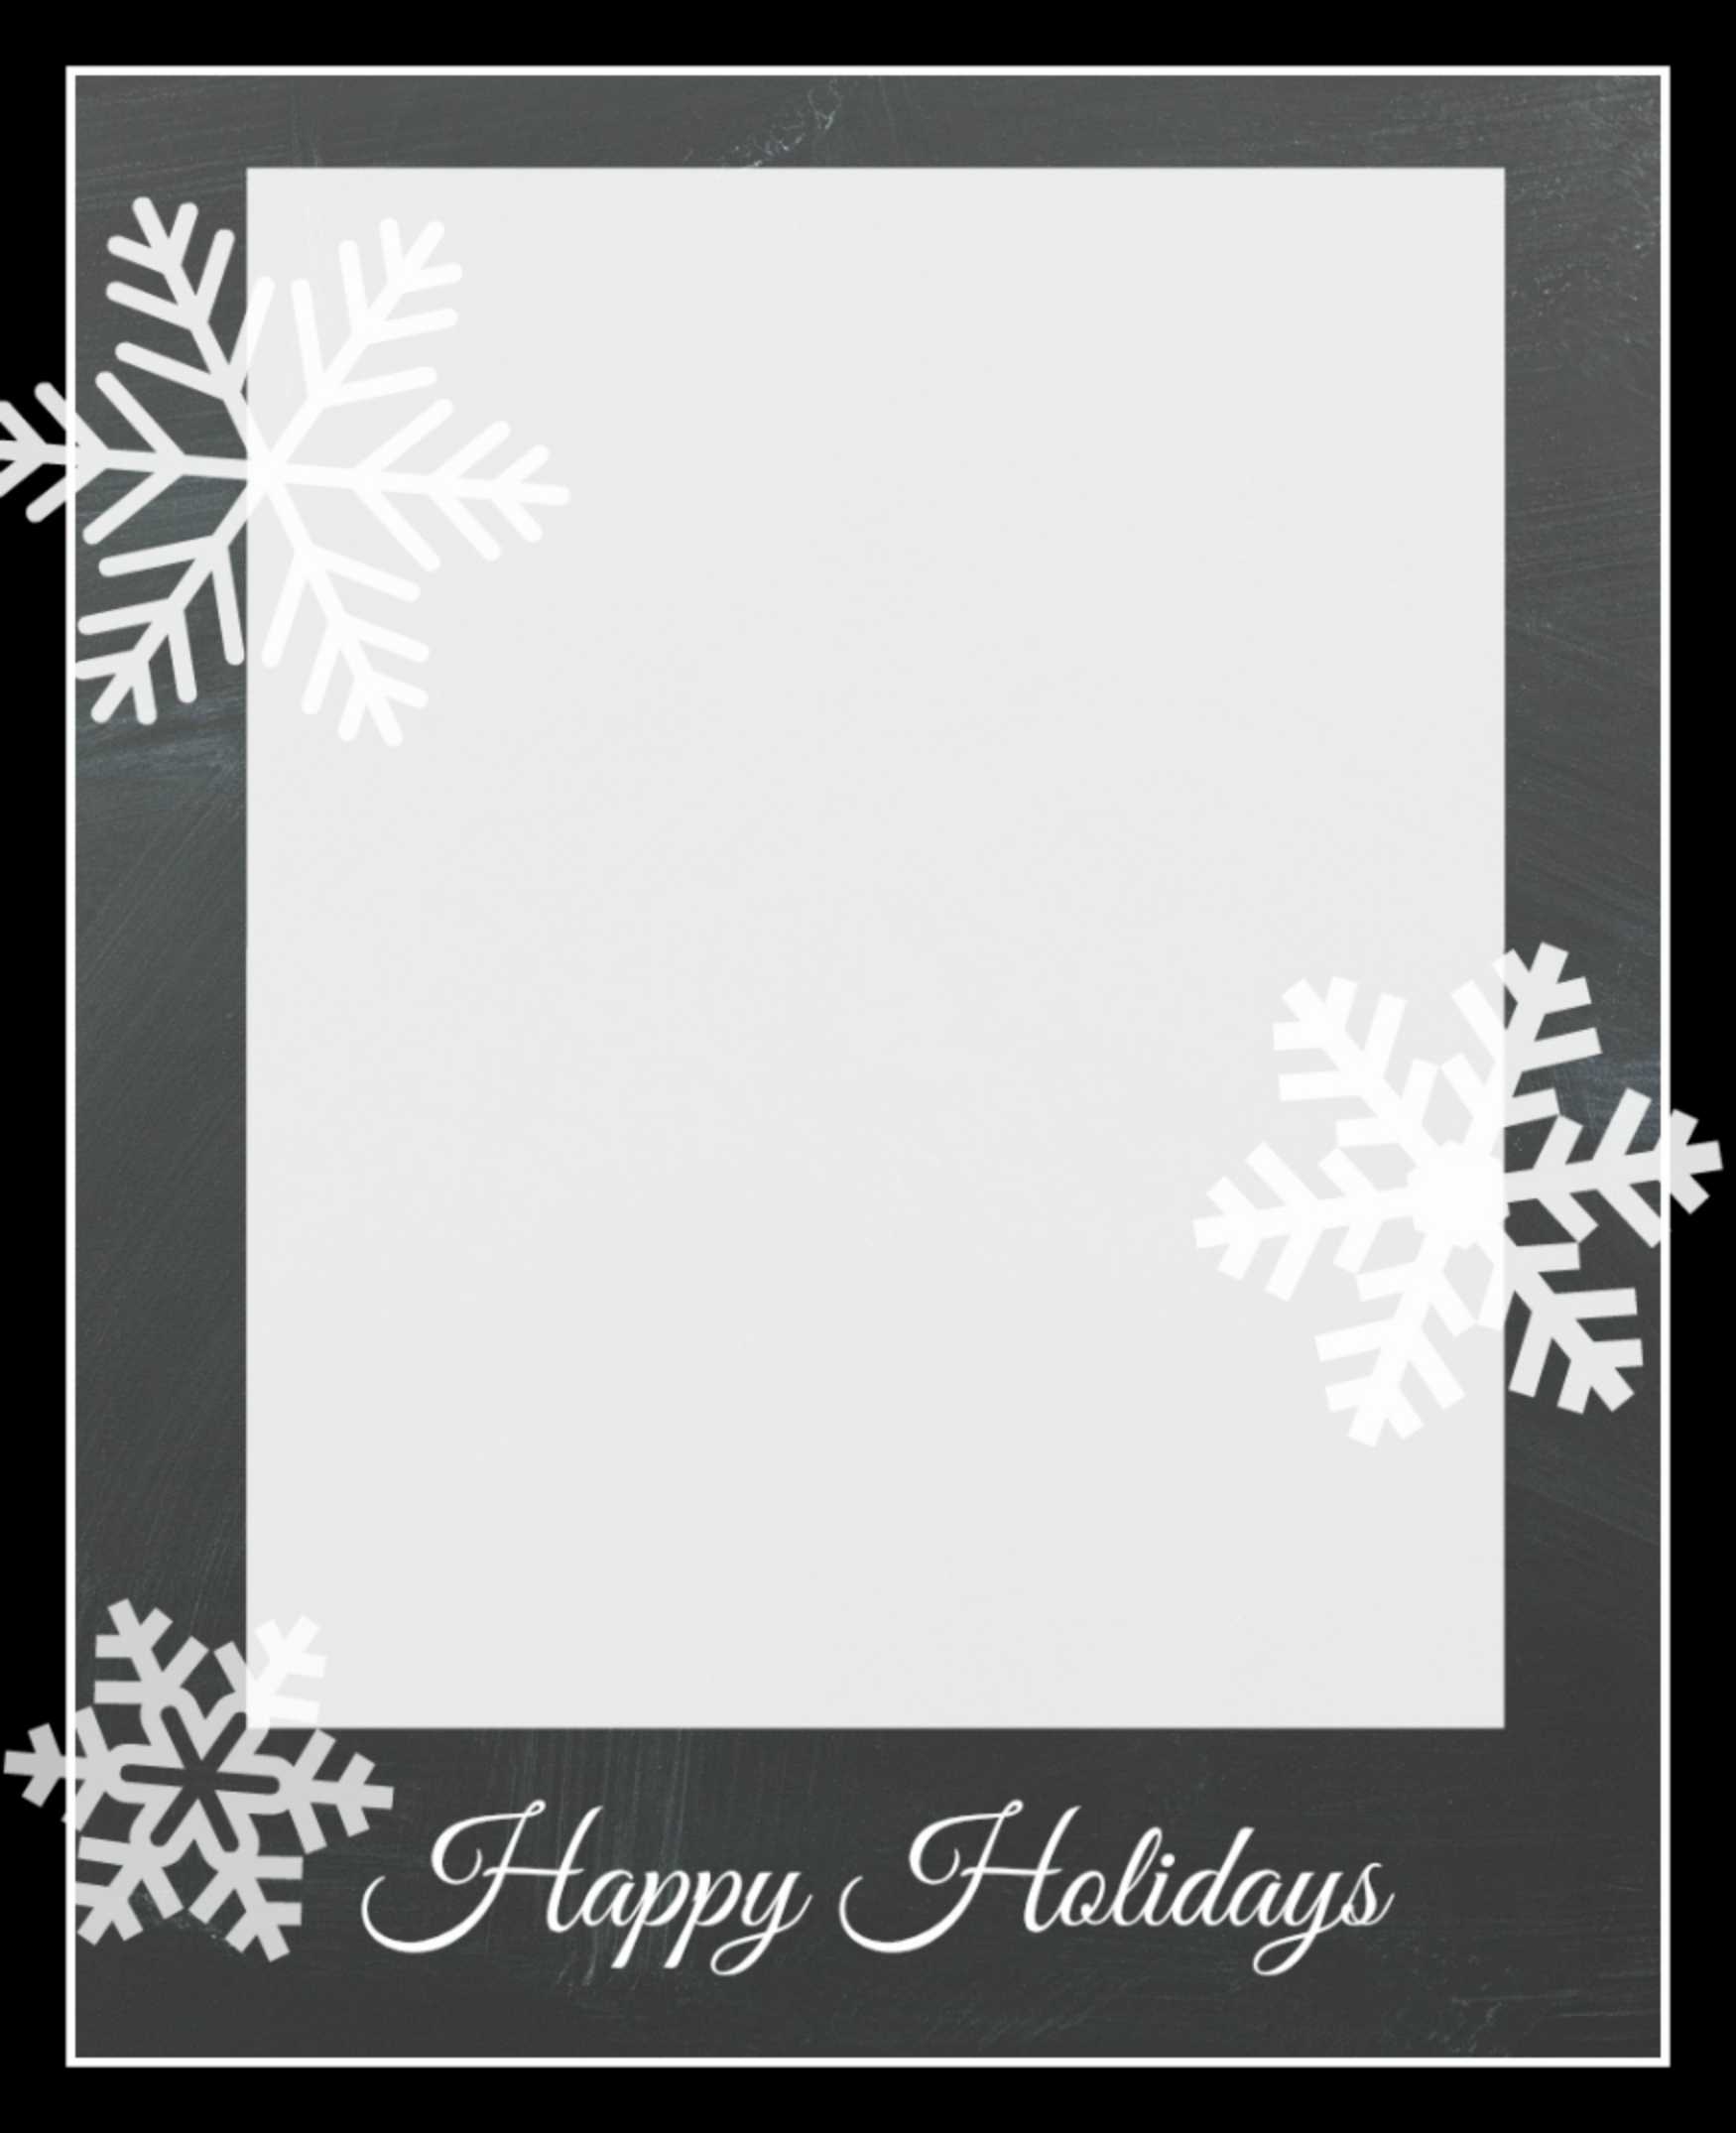 Free Christmas Photo Card Template – Zohre.horizonconsulting.co For Free Photoshop Christmas Card Templates For Photographers